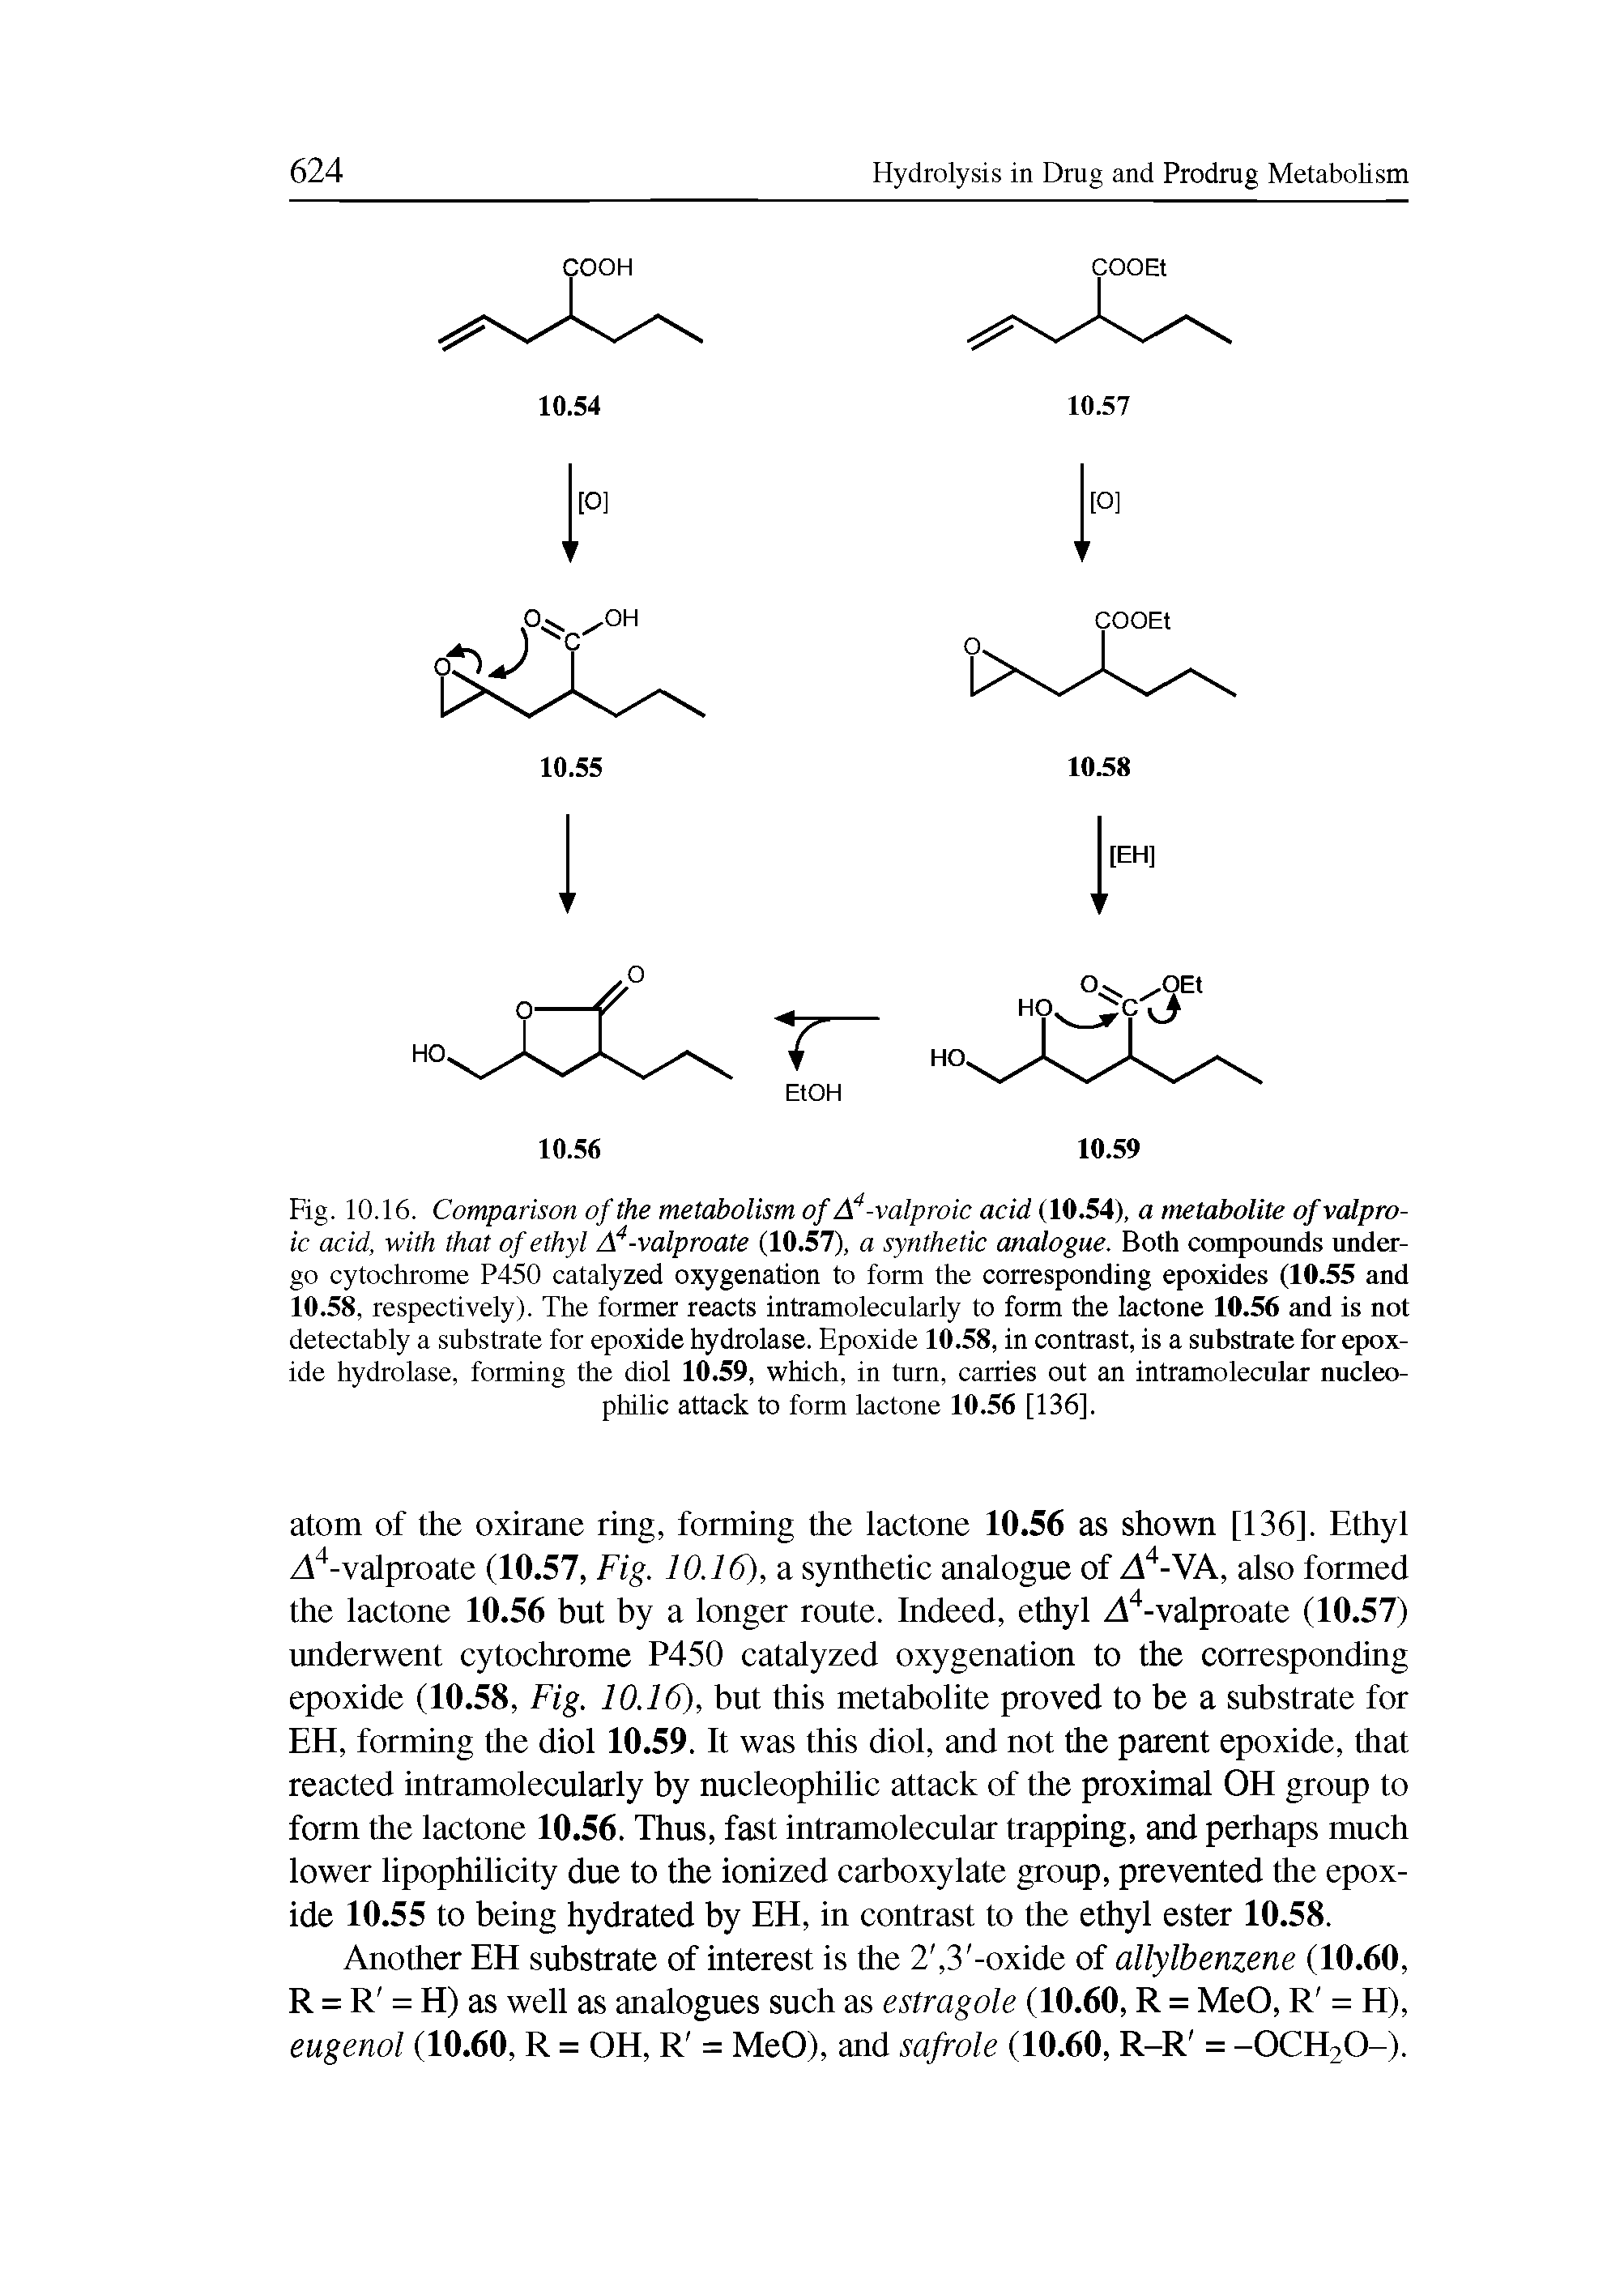 Fig. 10.16. Comparison of the metabolism of A4-valproic acid (10.54), a metabolite of valproic acid, with that of ethyl A4-valproate (10.57), a synthetic analogue. Both compounds undergo cytochrome P450 catalyzed oxygenation to form the corresponding epoxides (10.55 and 10.58, respectively). The former reacts intramolecularly to form the lactone 10.56 and is not detectably a substrate for epoxide hydrolase. Epoxide 10.58, in contrast, is a substrate for epoxide hydrolase, forming the diol 10.59, which, in turn, carries out an intramolecular nucleophilic attack to form lactone 10.56 [136],...